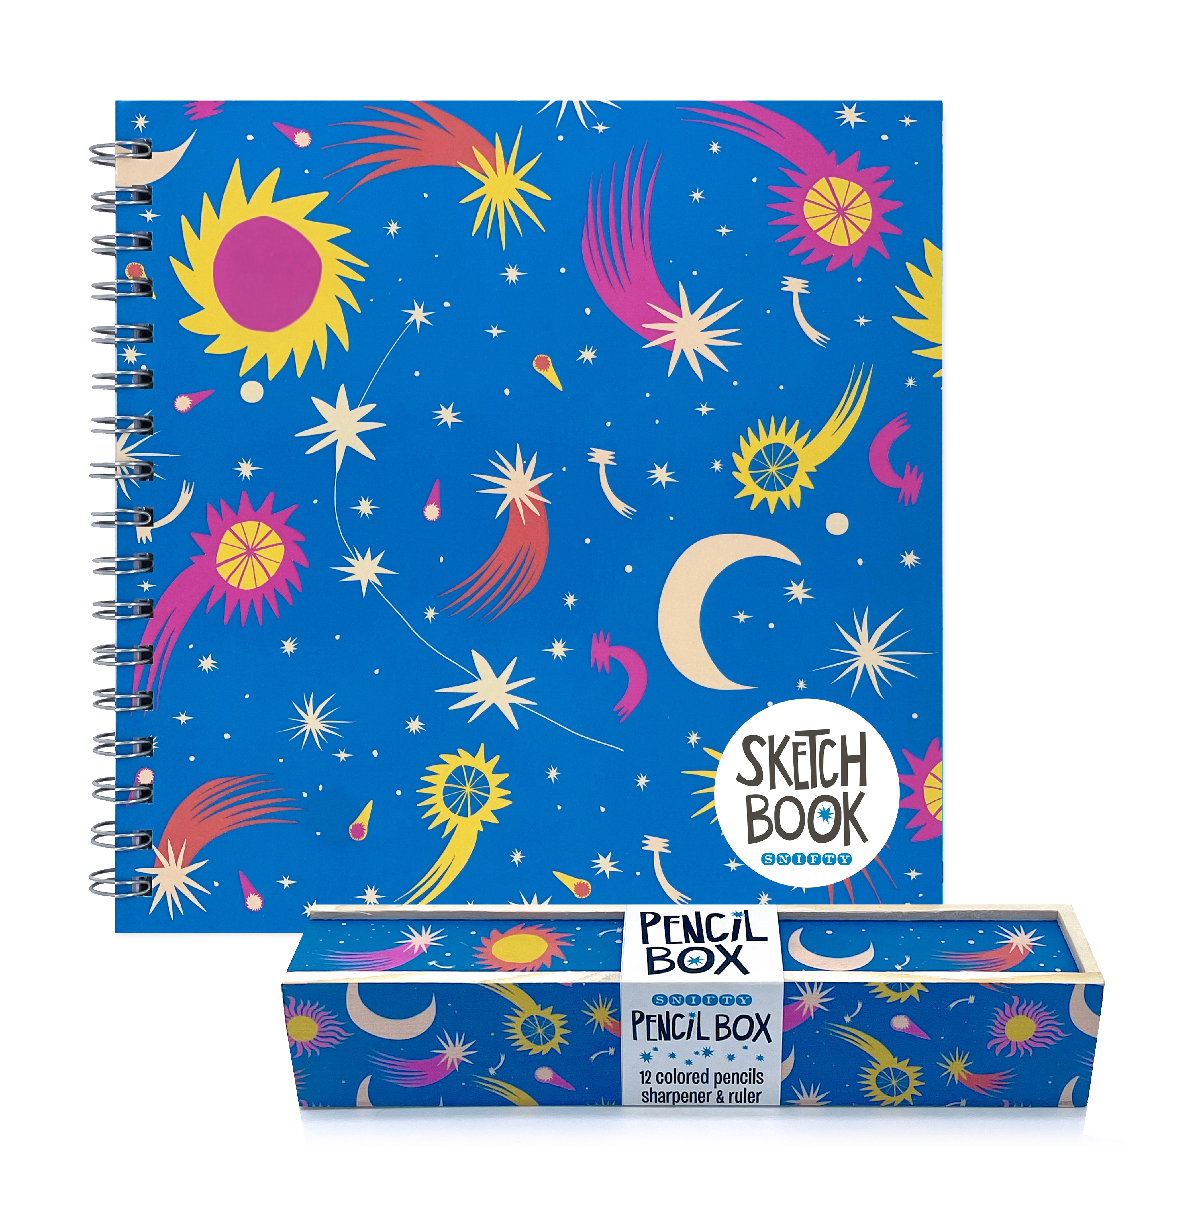 cosmic sketch set – pencil box + sketchbook – Snifty Scented Products